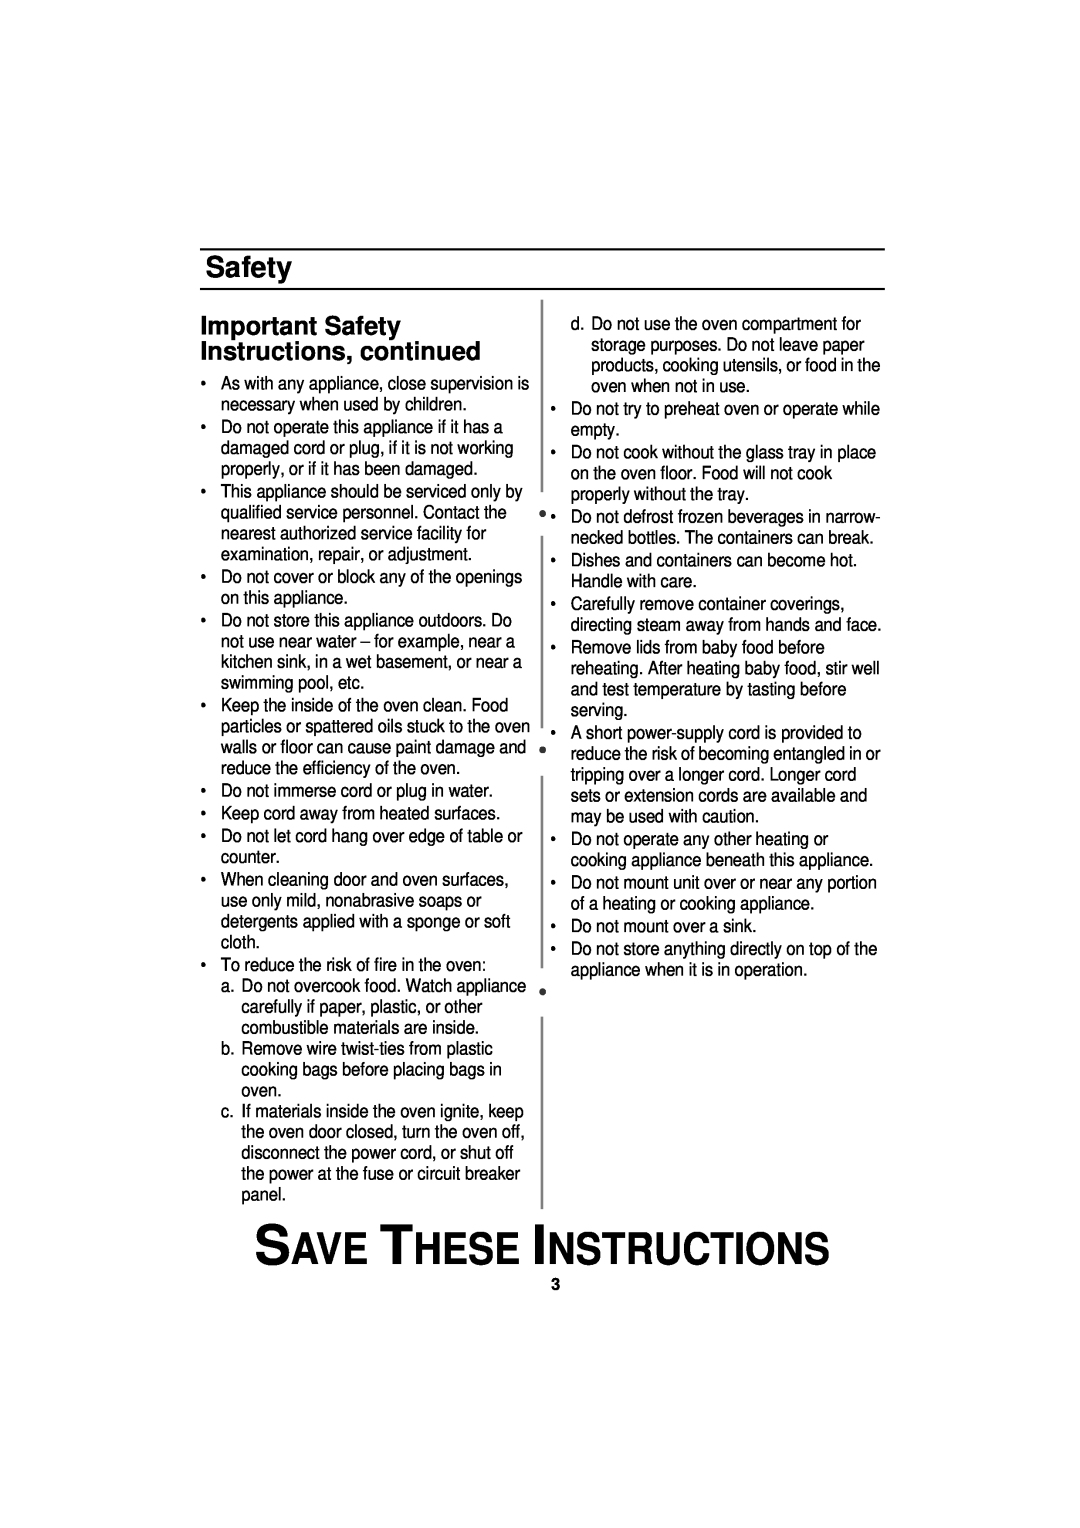 Samsung DE68-01931A-01 manual Save These Instructions, Important Safety Instructions, continued 